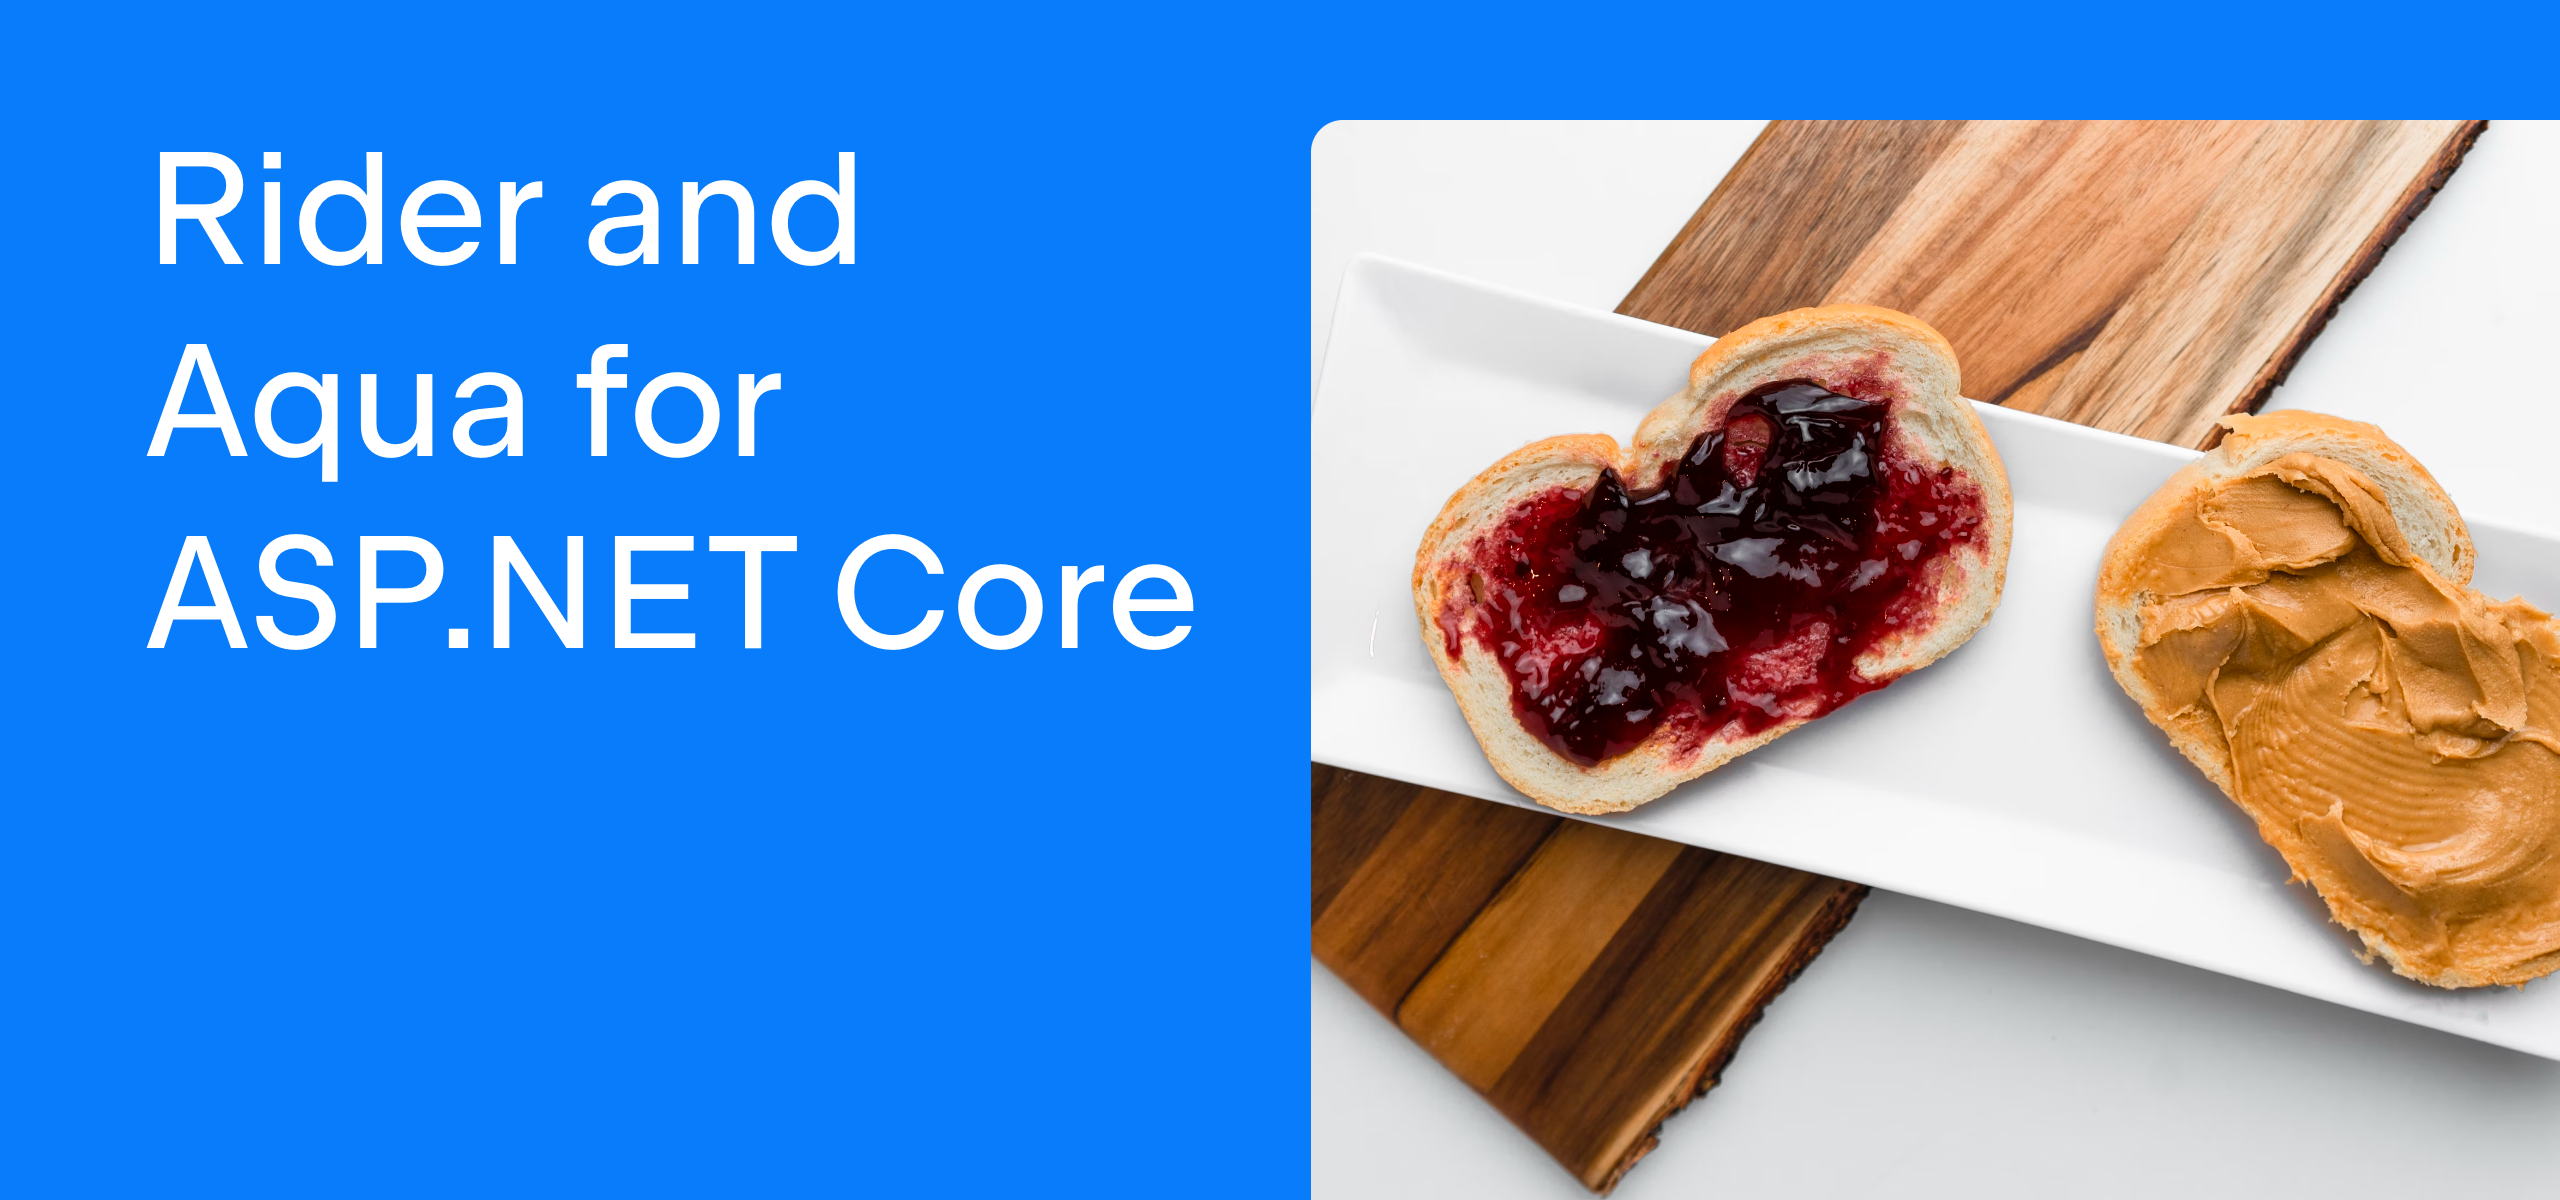 Rider and Aqua for ASP.NET Core (Peanut Butter and Jelly)